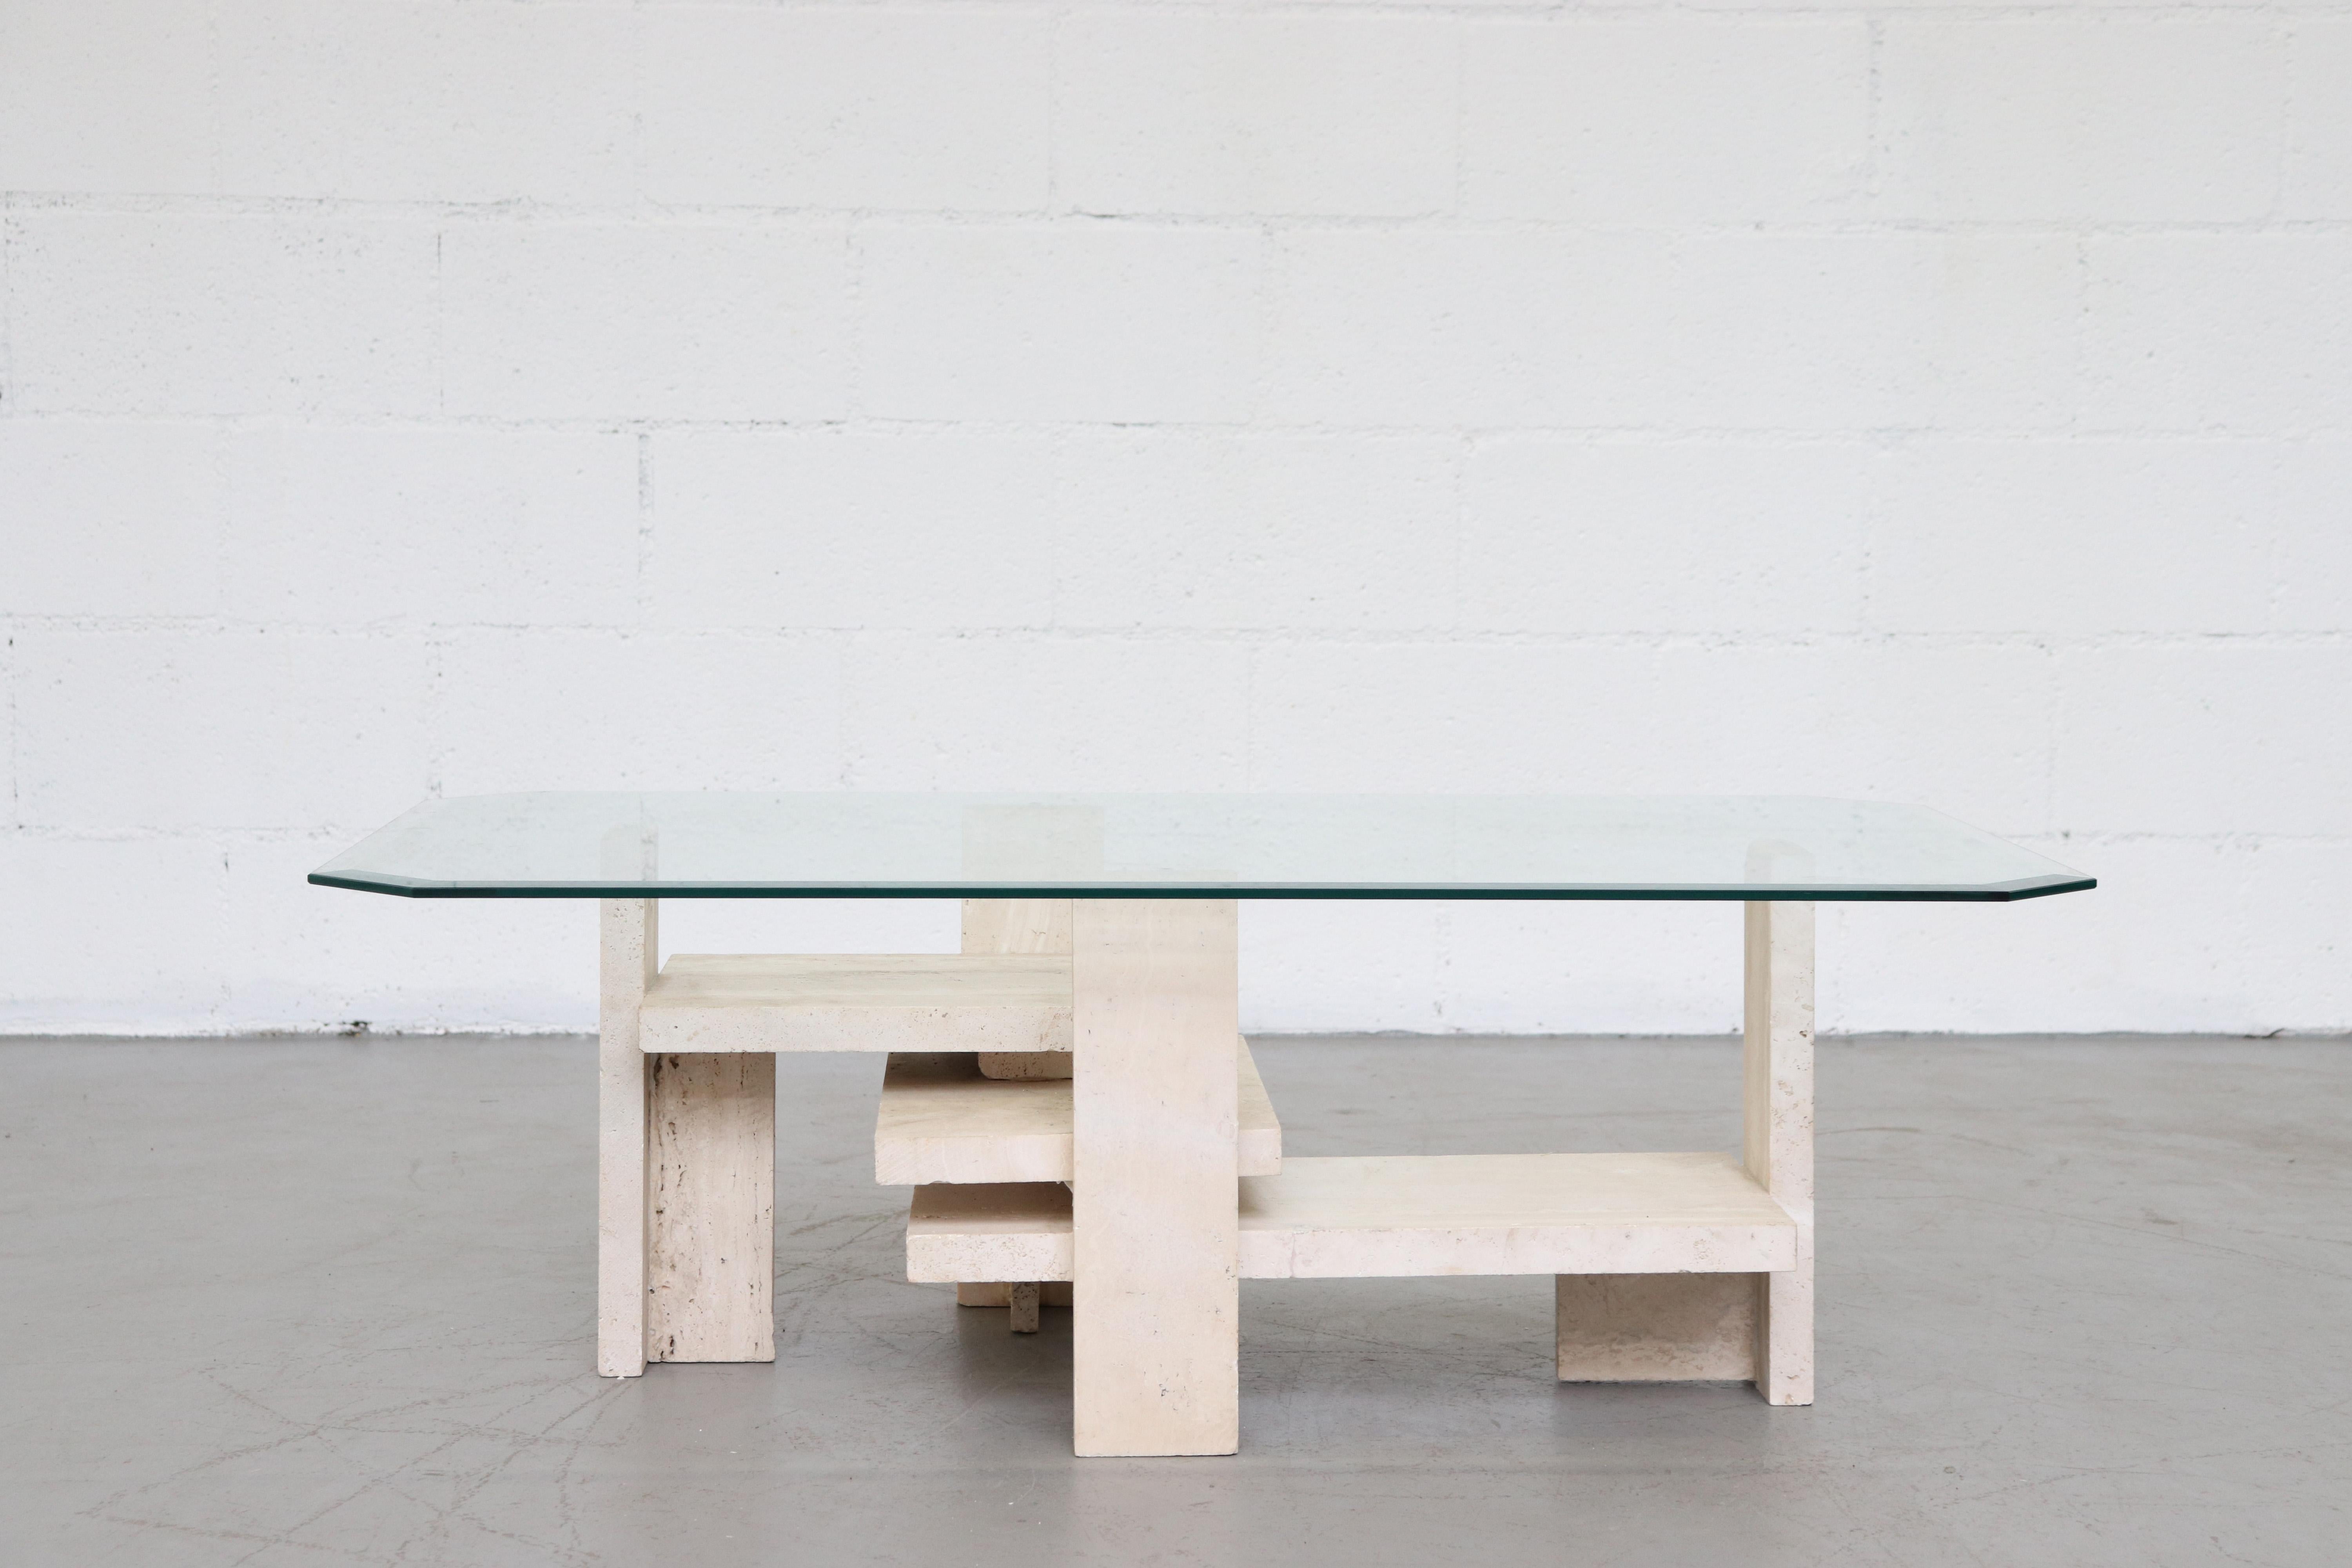 Modernist travertine and bevelled glass coffee table by Willy Ballez, 1970s, Belgium. Ballez has renown as a sculptor but was the designer of some highly architectural tables, working mostly in granite or travertine. This piece is in original